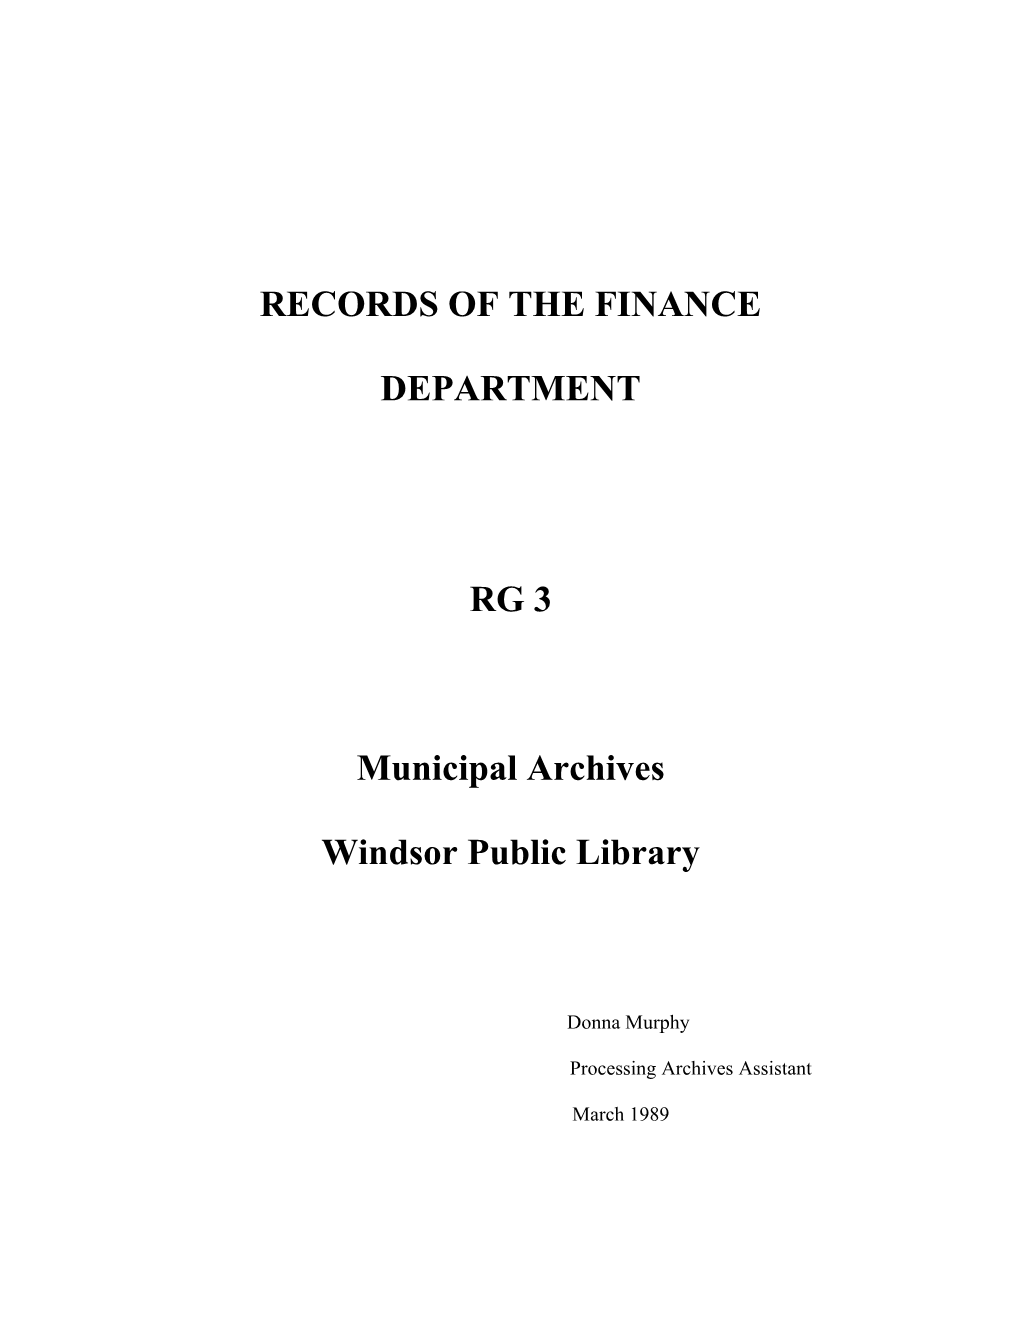 Records of the Finance